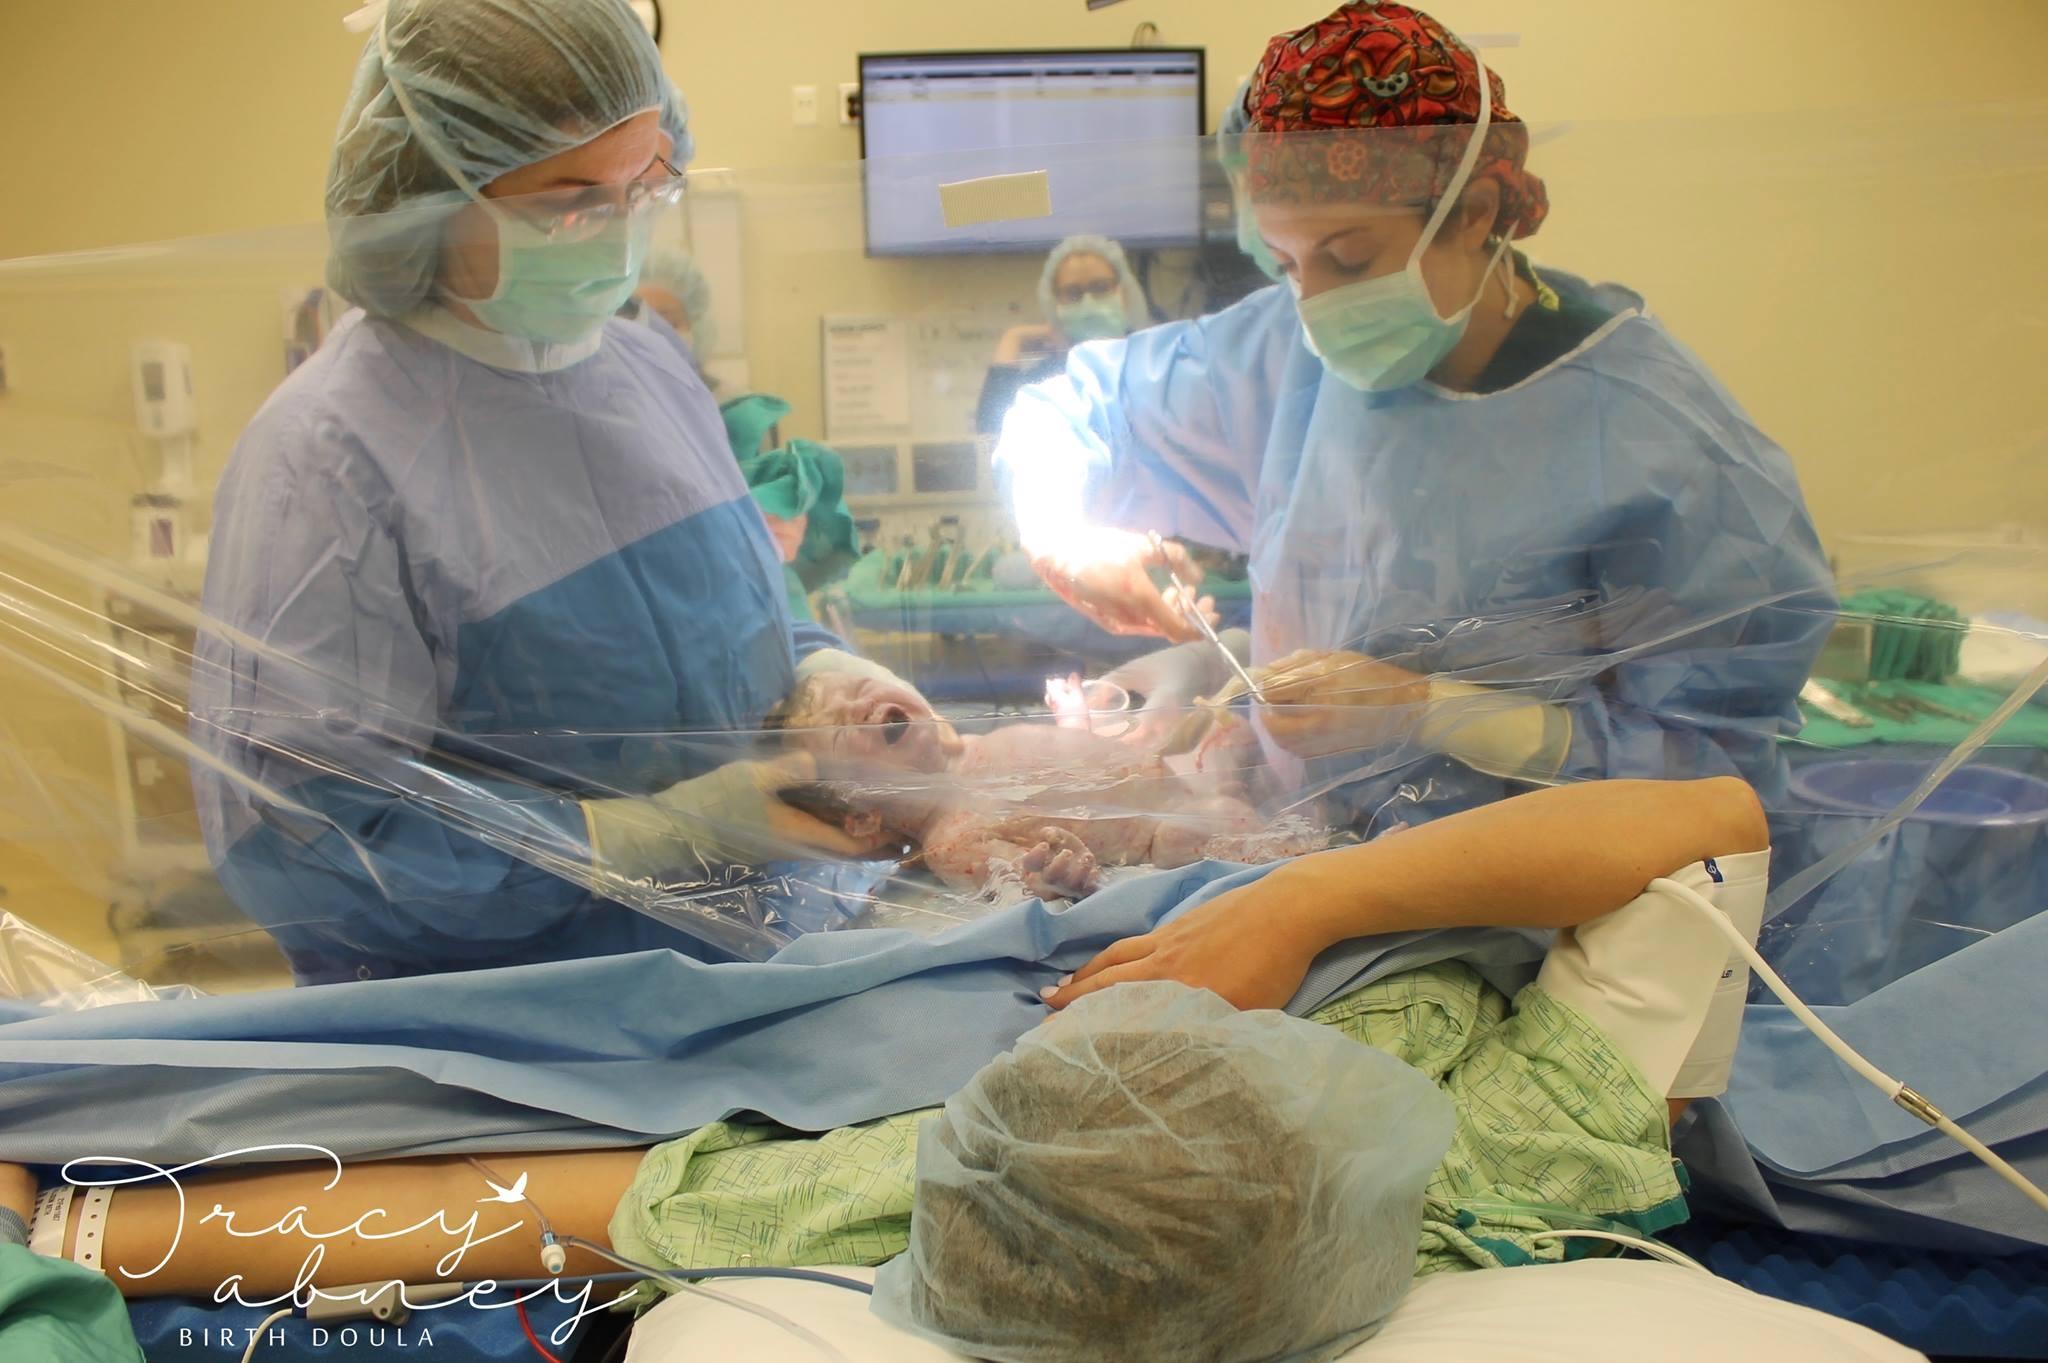 A ‘Clear drape C-section’ allows people see their cesarean birth happening